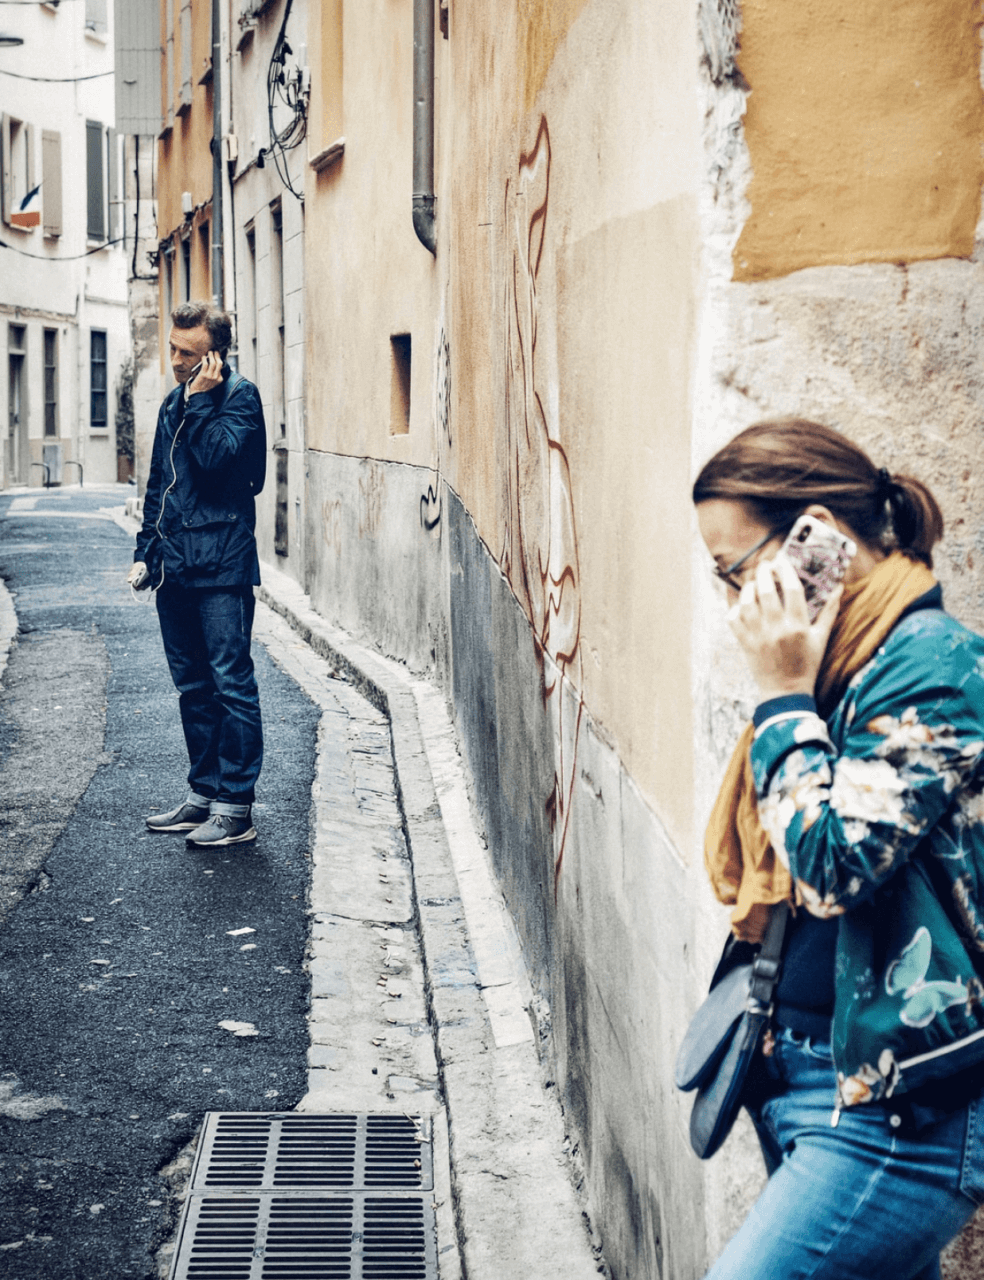 A woman and a man are on two separate phone calls in alleyway